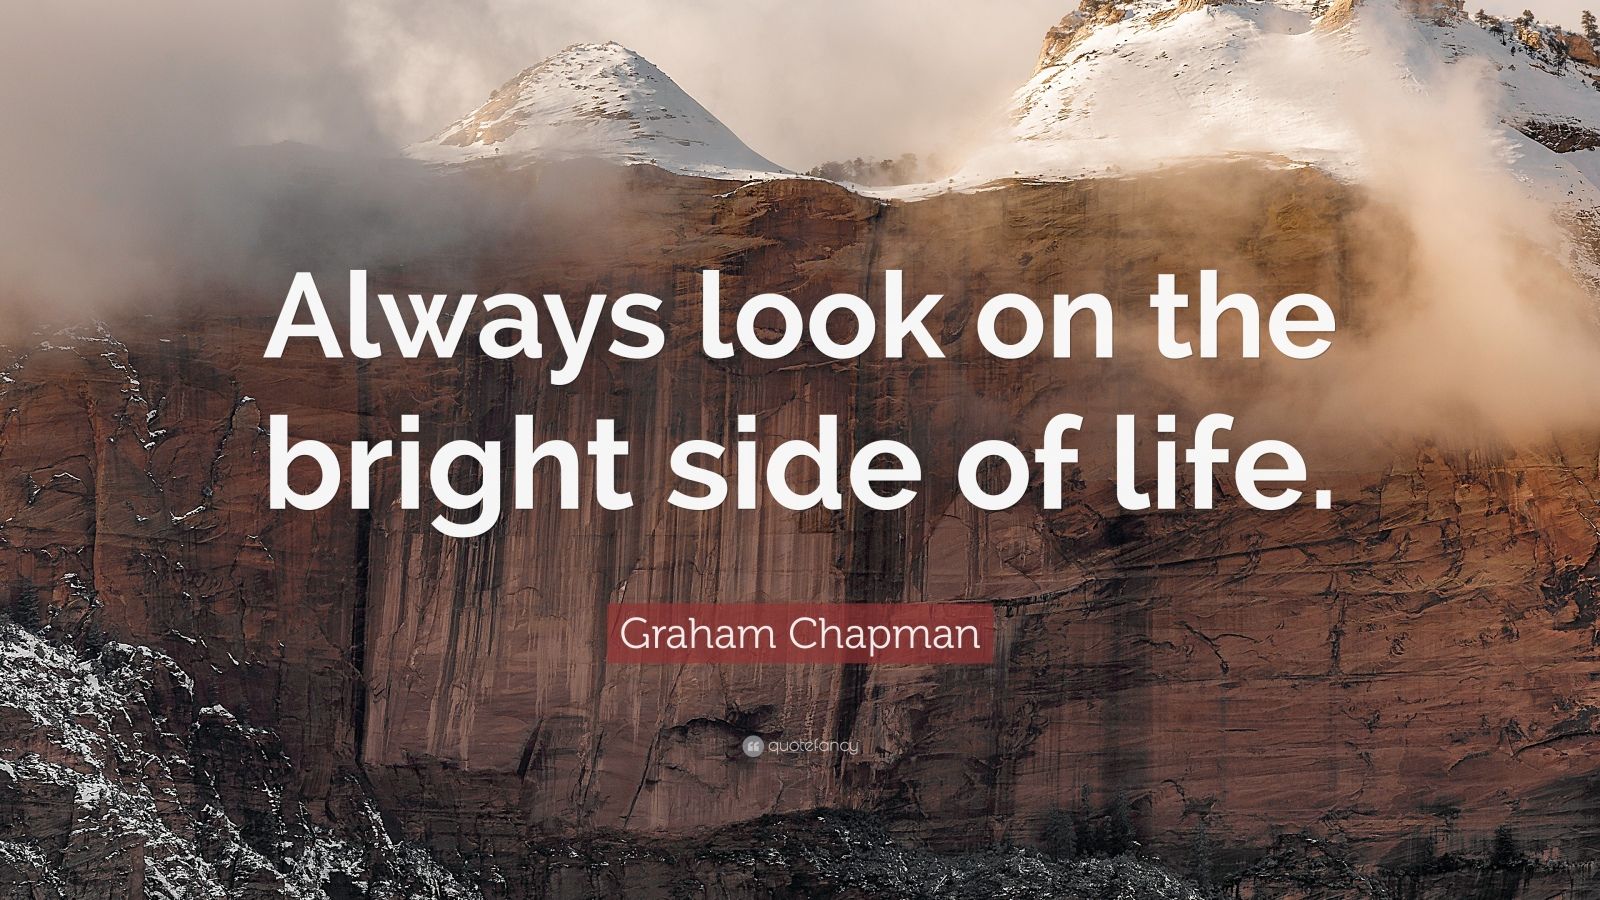 Always Look On The Bright Side Of Life Tekst Graham Chapman Quote: “Always look on the bright side of life.” (12